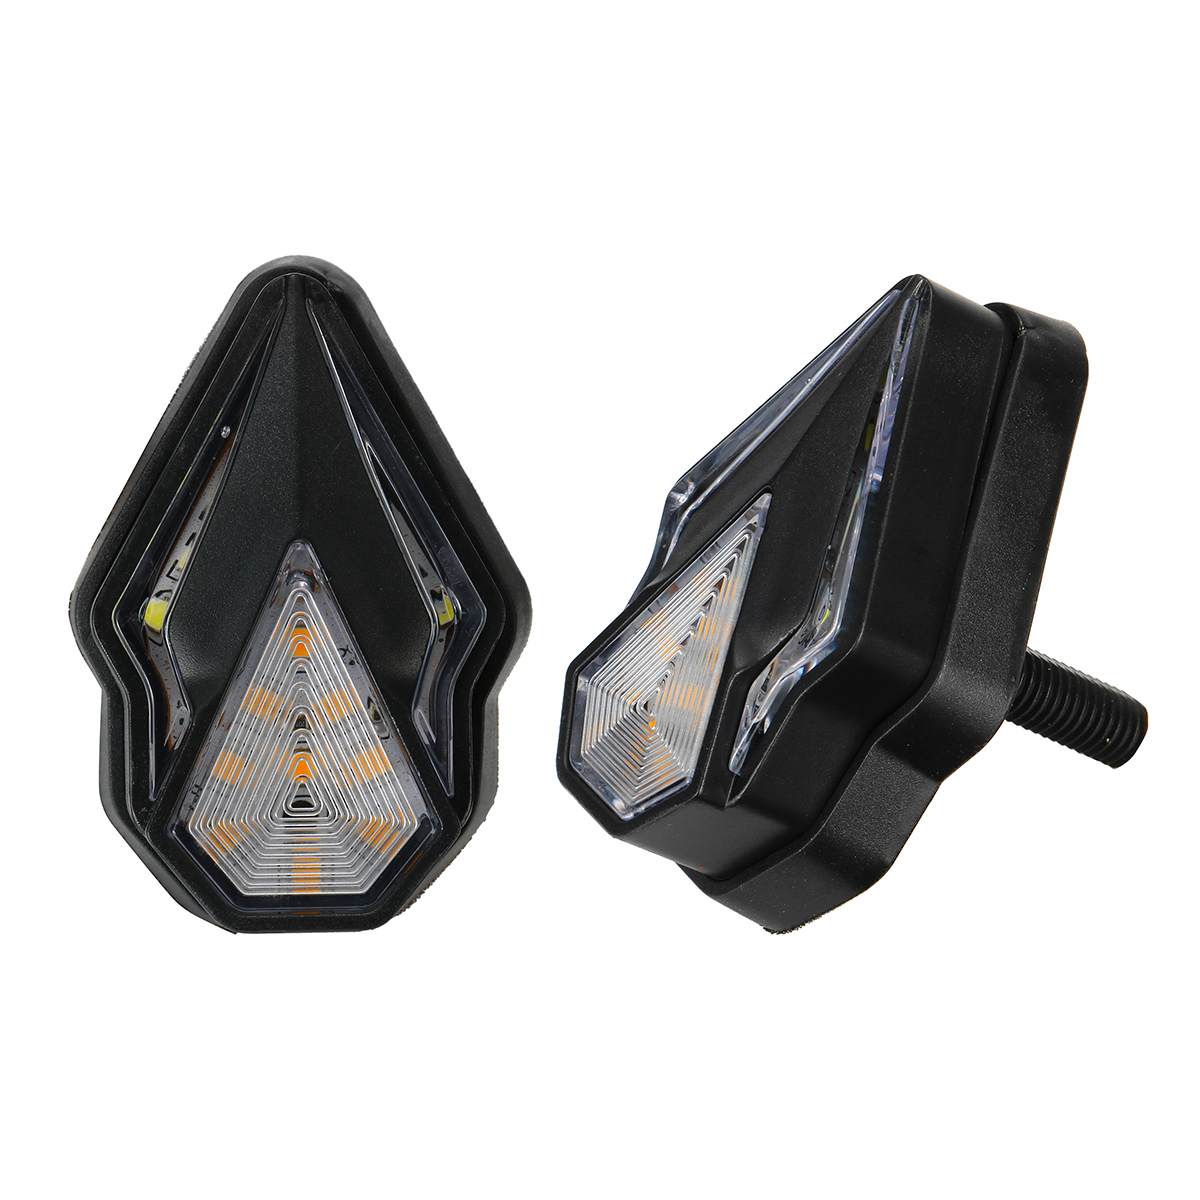 Motorcycle Sequential Flush Mount Turn Signal Amber LED Lights Indicator DRL - Auto GoShop